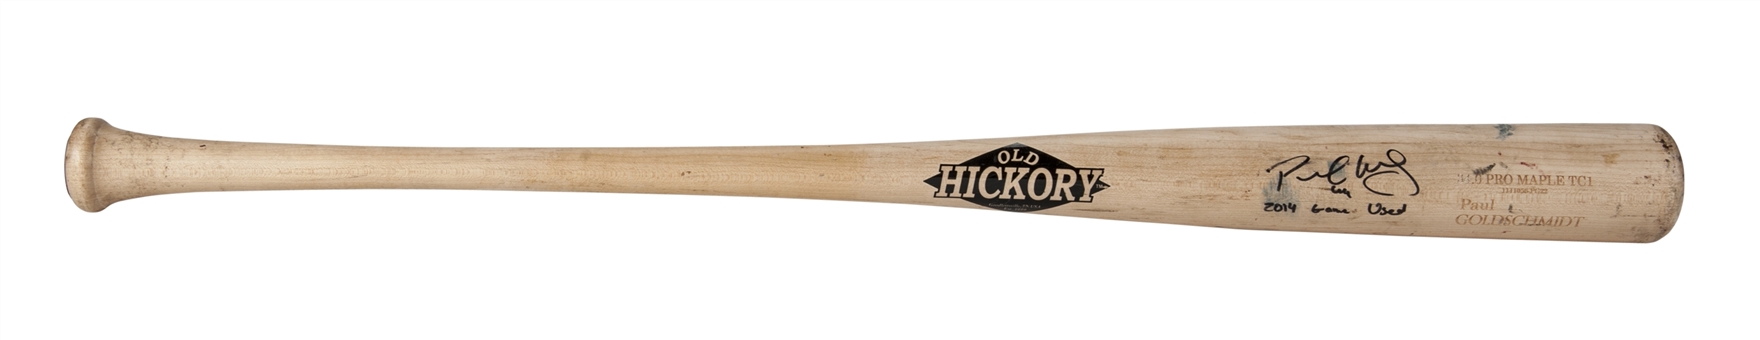 2014 Paul Goldschmidt Game Used and Signed Old Hickory TC1 Model Bat (PSA/DNA GU 8.5, MLB Authenticated & Fanatics)